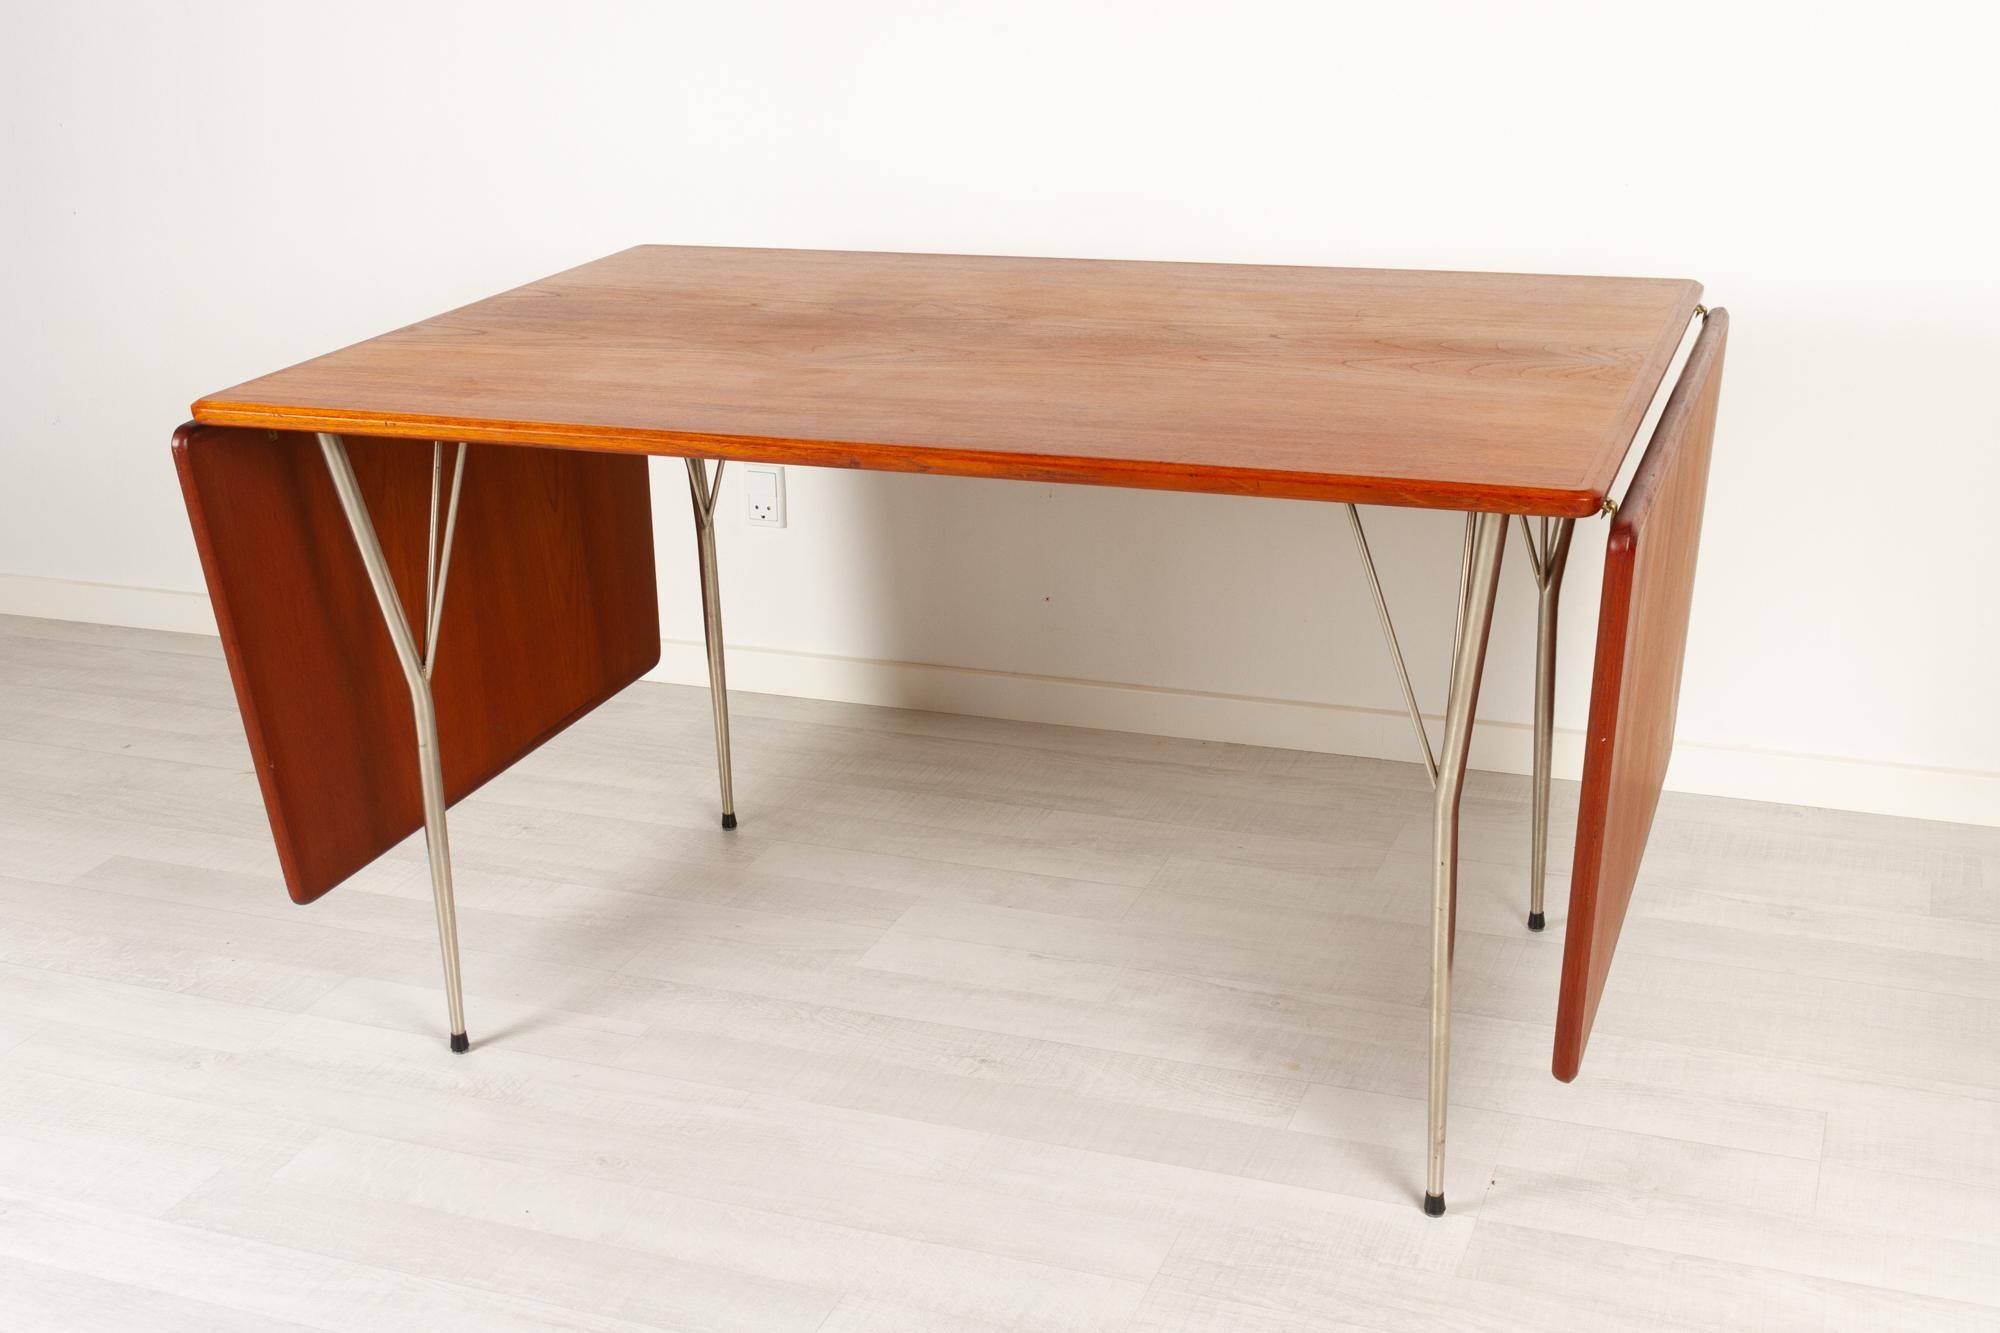 Vintage Danish Teak Drop Leaf Dining Table, 1950s In Good Condition For Sale In Asaa, DK